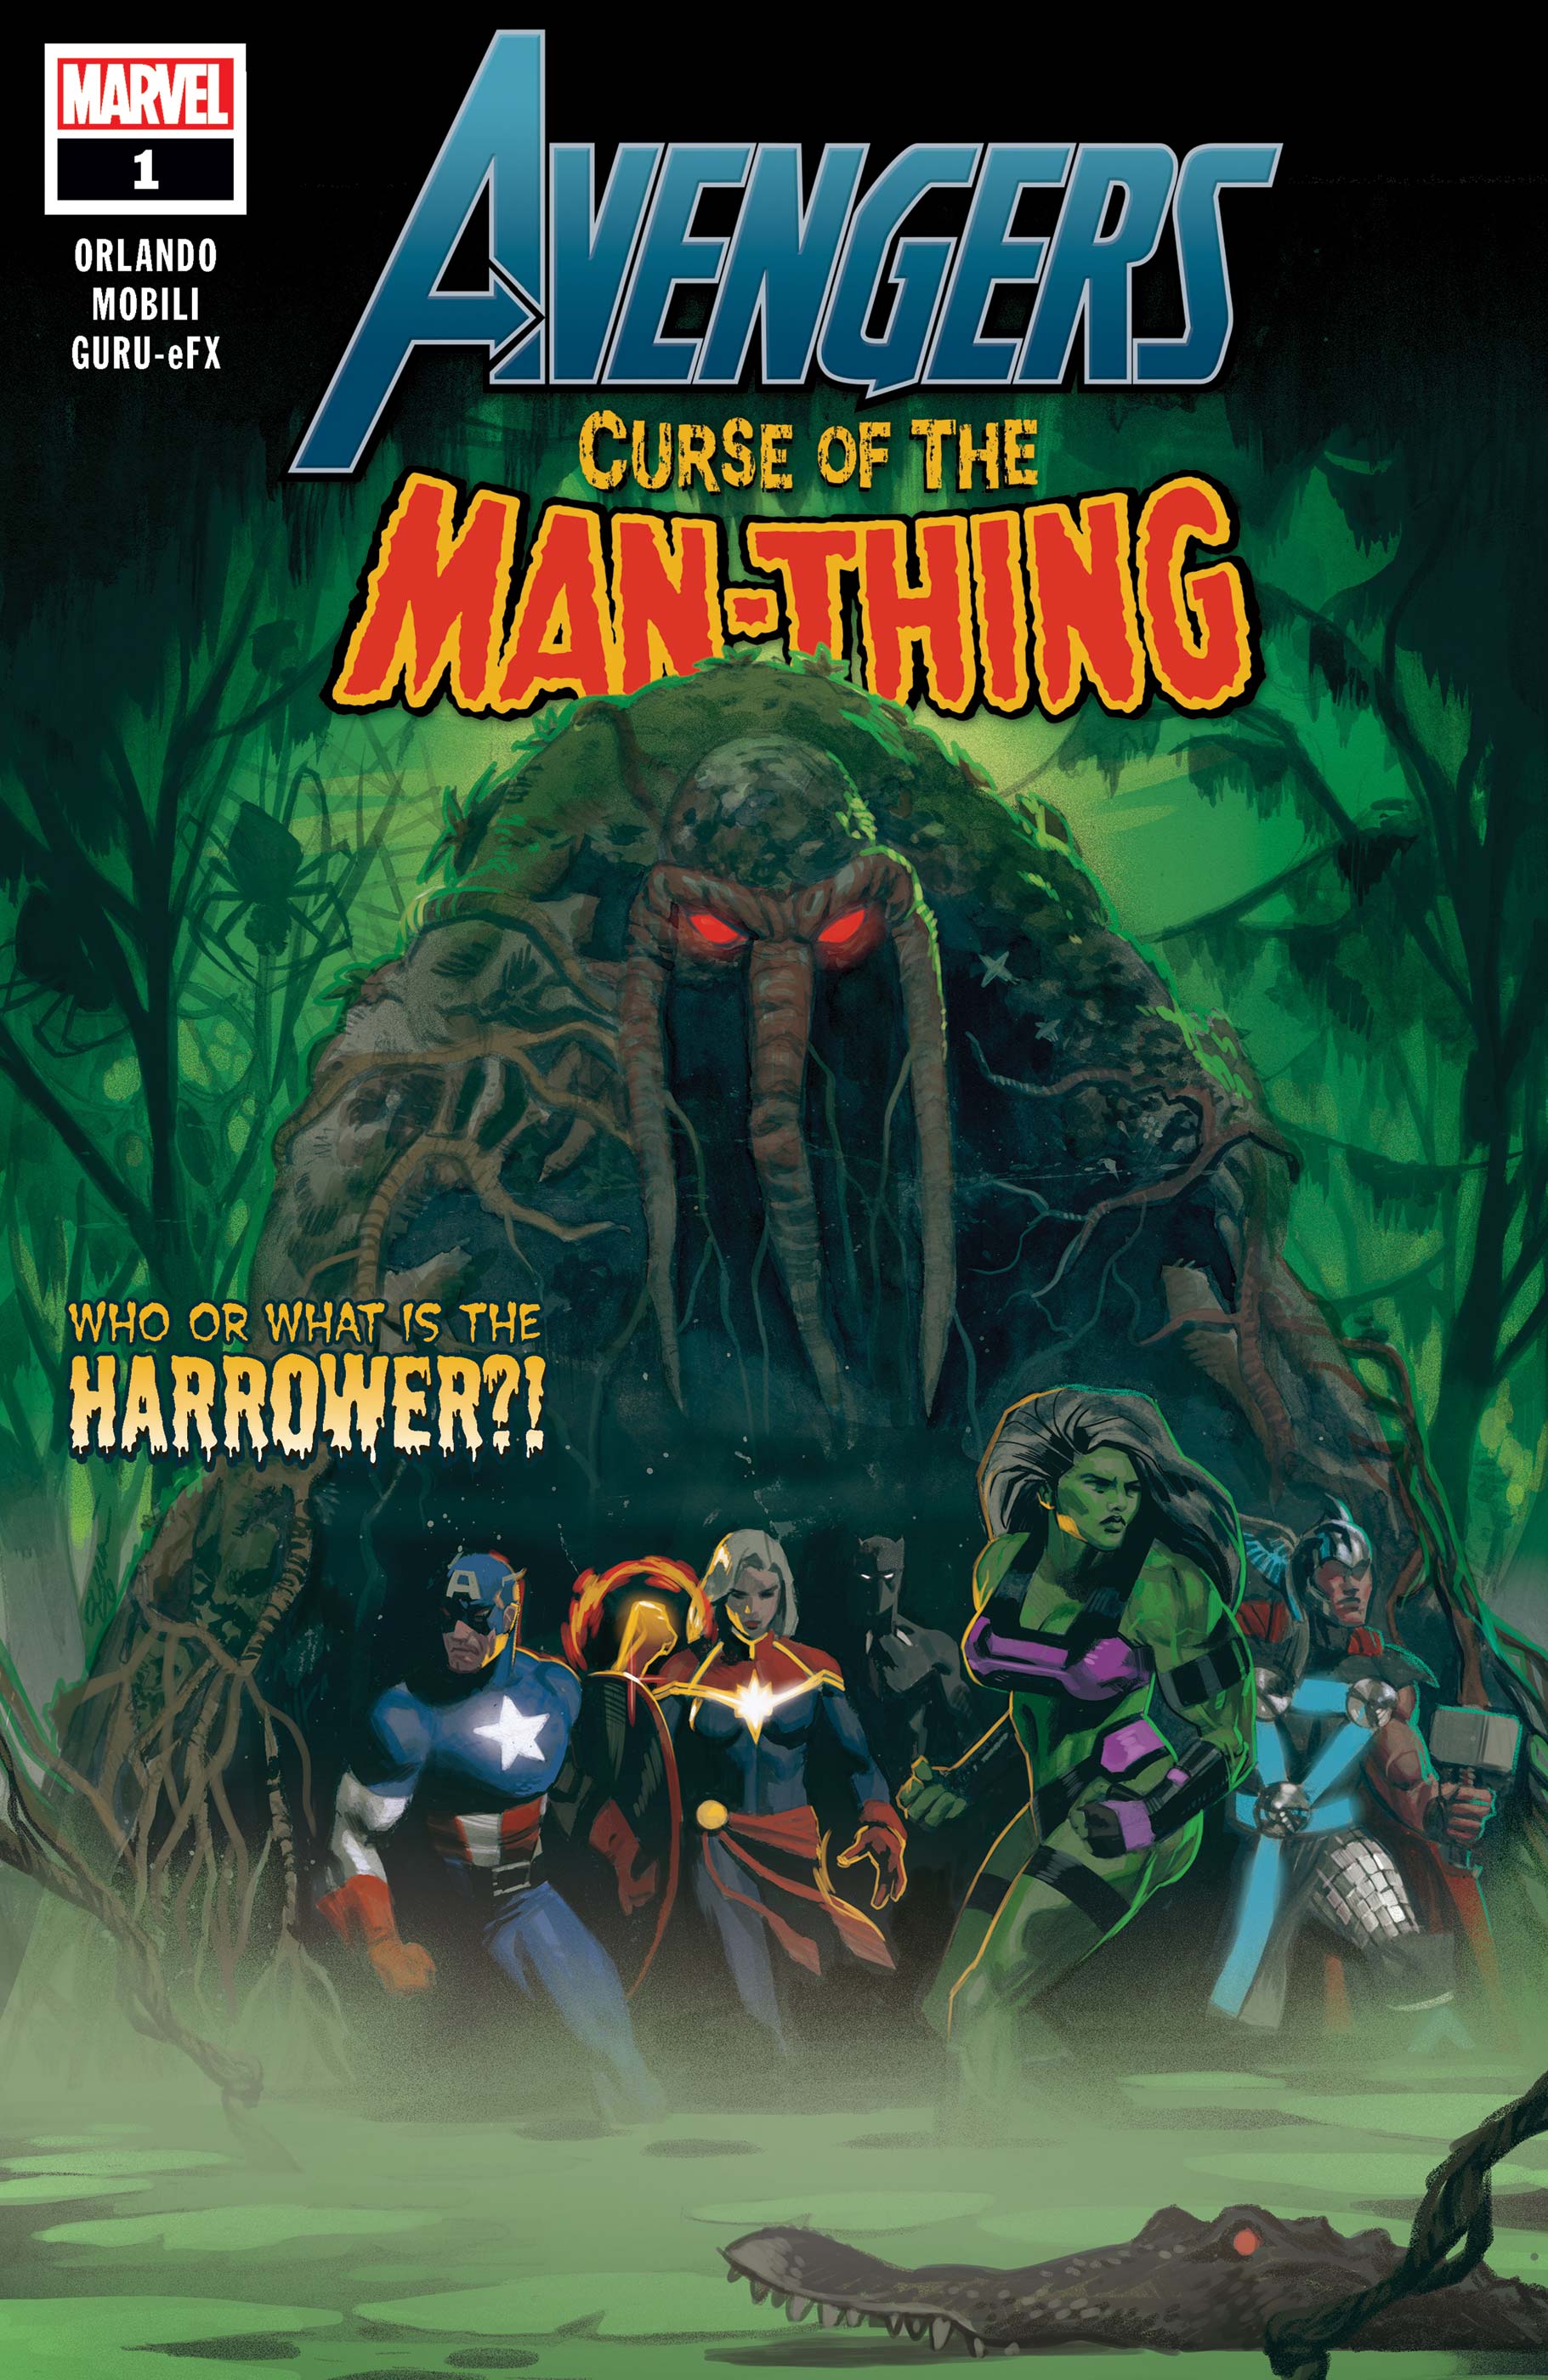 Man thing marvel perfect boot